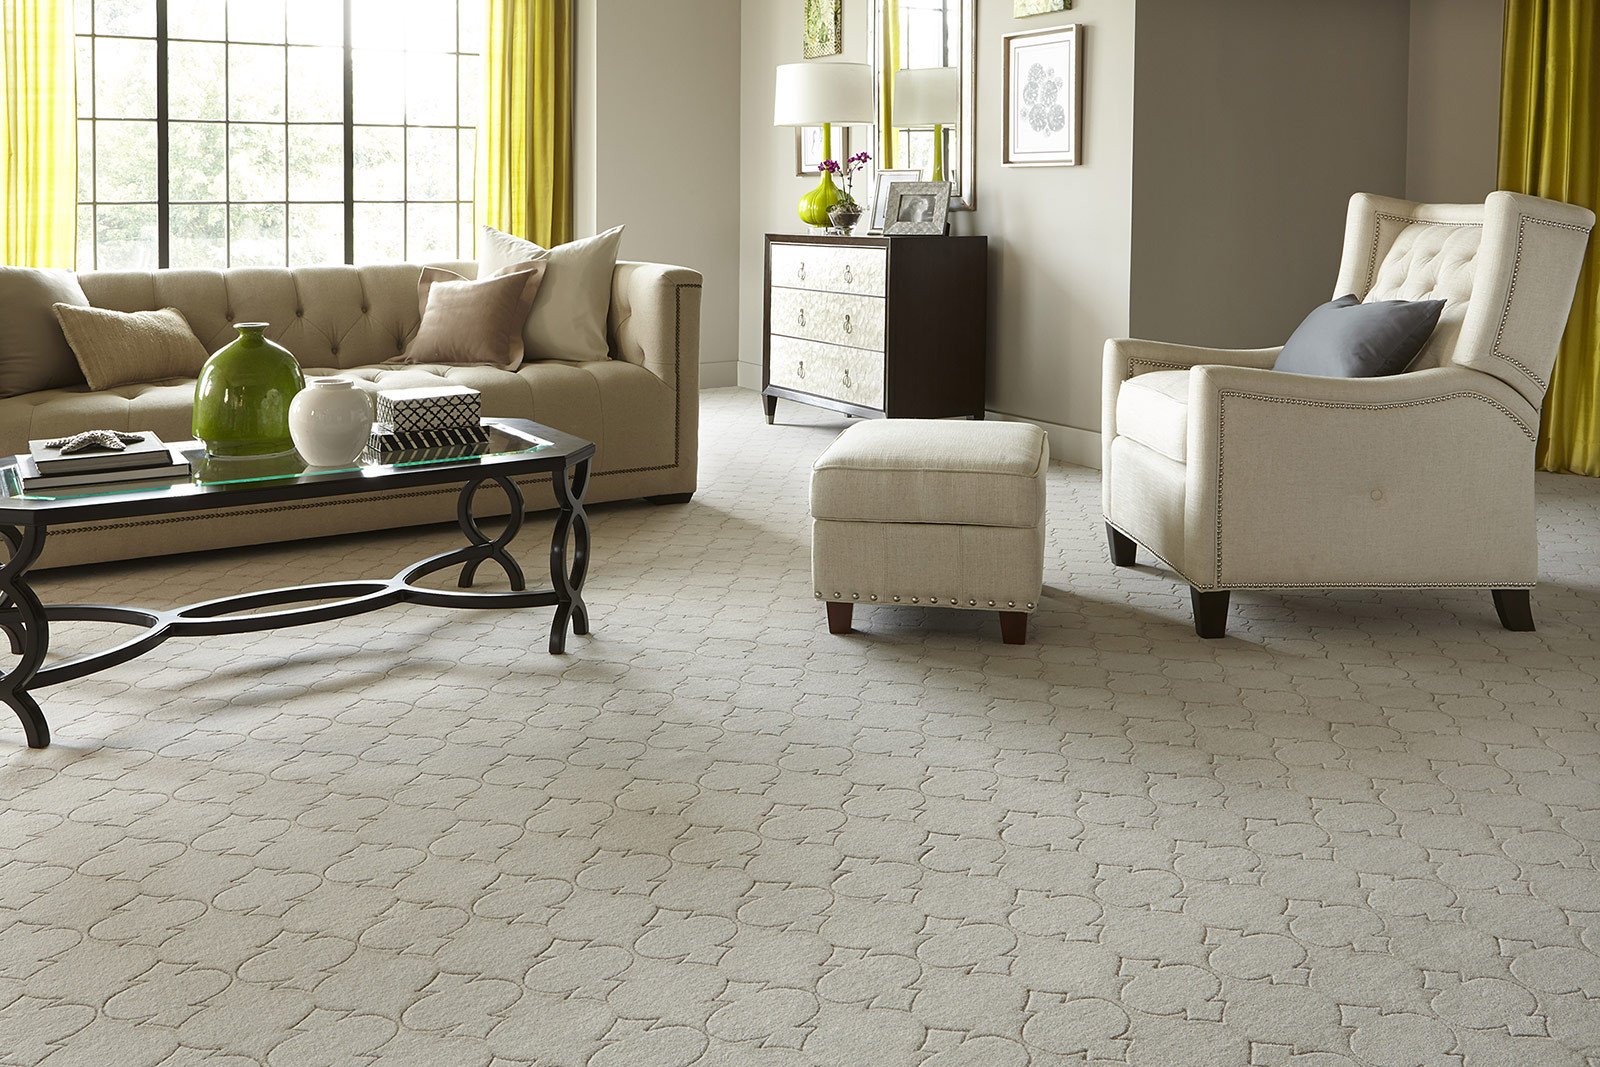 Carpet for Living Room Ideas Best Of 10 Easy to Follow Design Ideas for Small Apartments